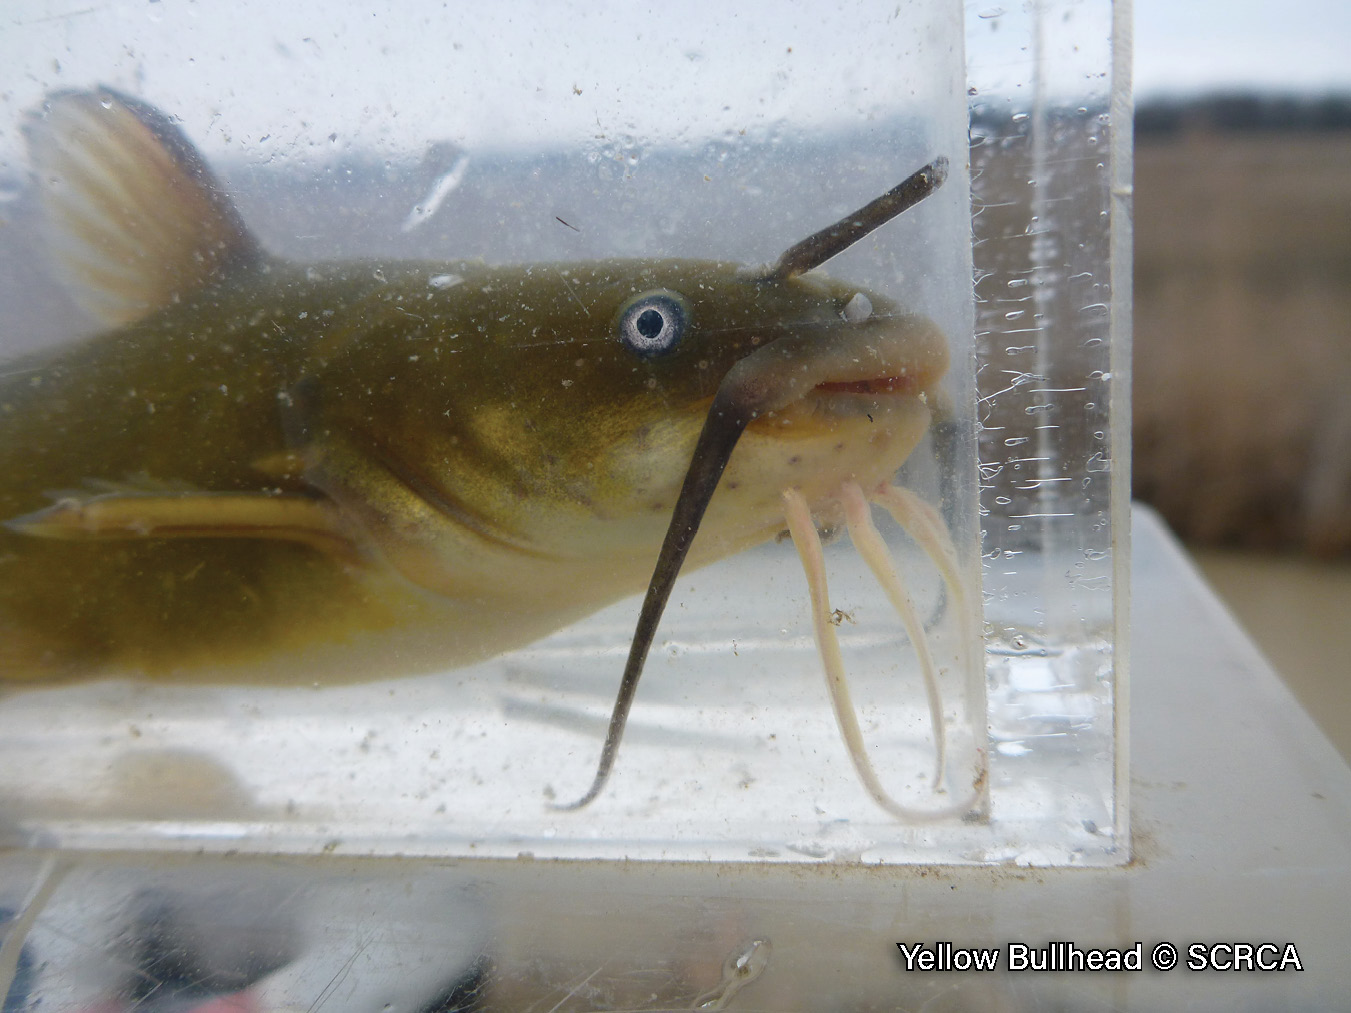 Picture of a young yellow bullhead in a viewing box, a yellowish-brown catfish with barbels